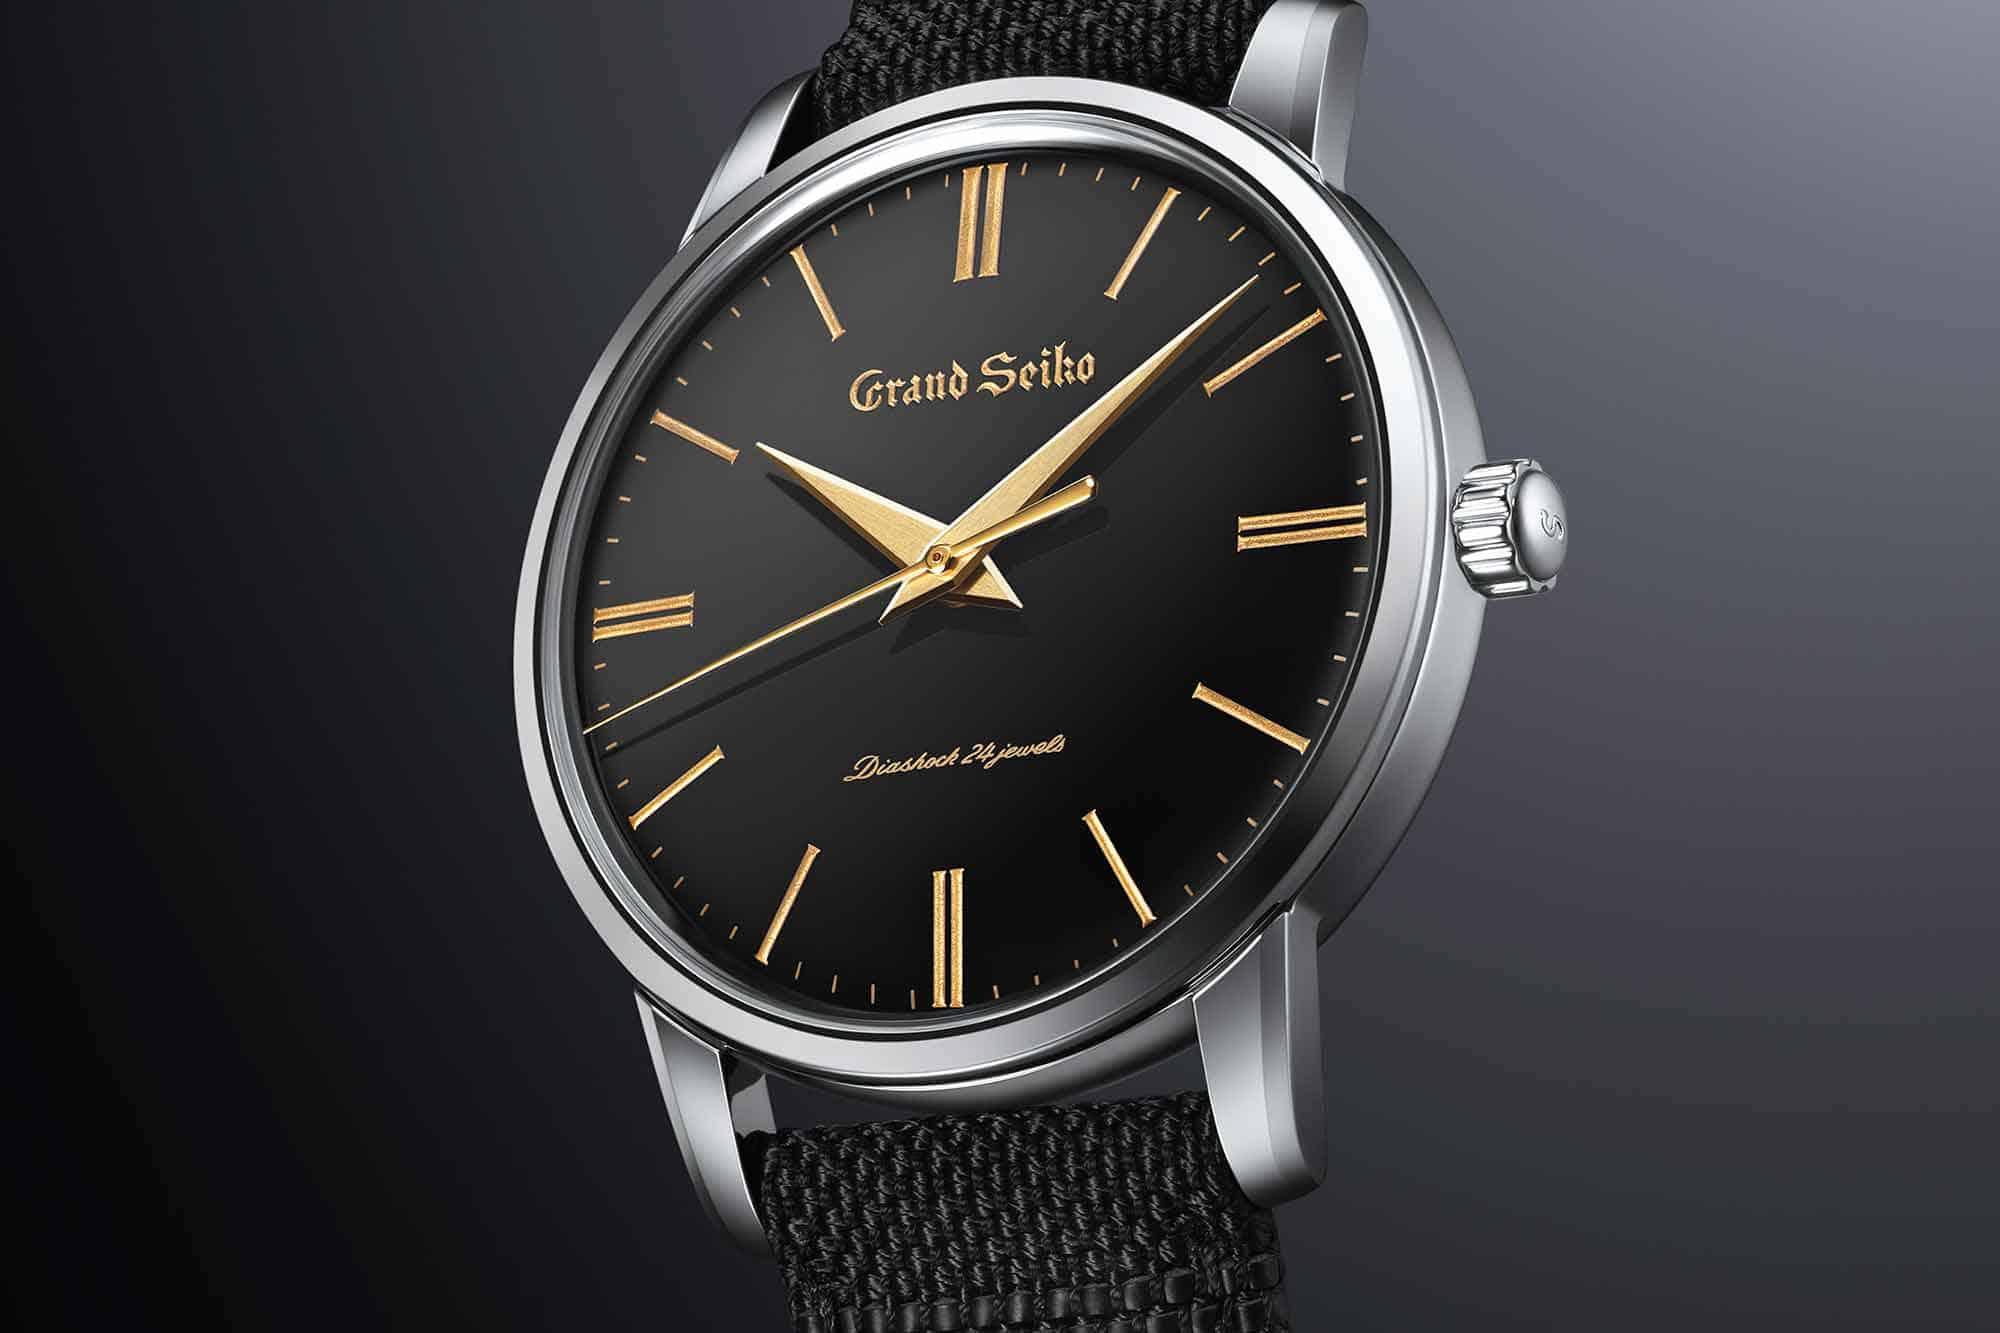 Grand Seiko’s Latest Limited Edition is a Urushi Lacquered Version of the “First” with a Gold Touch